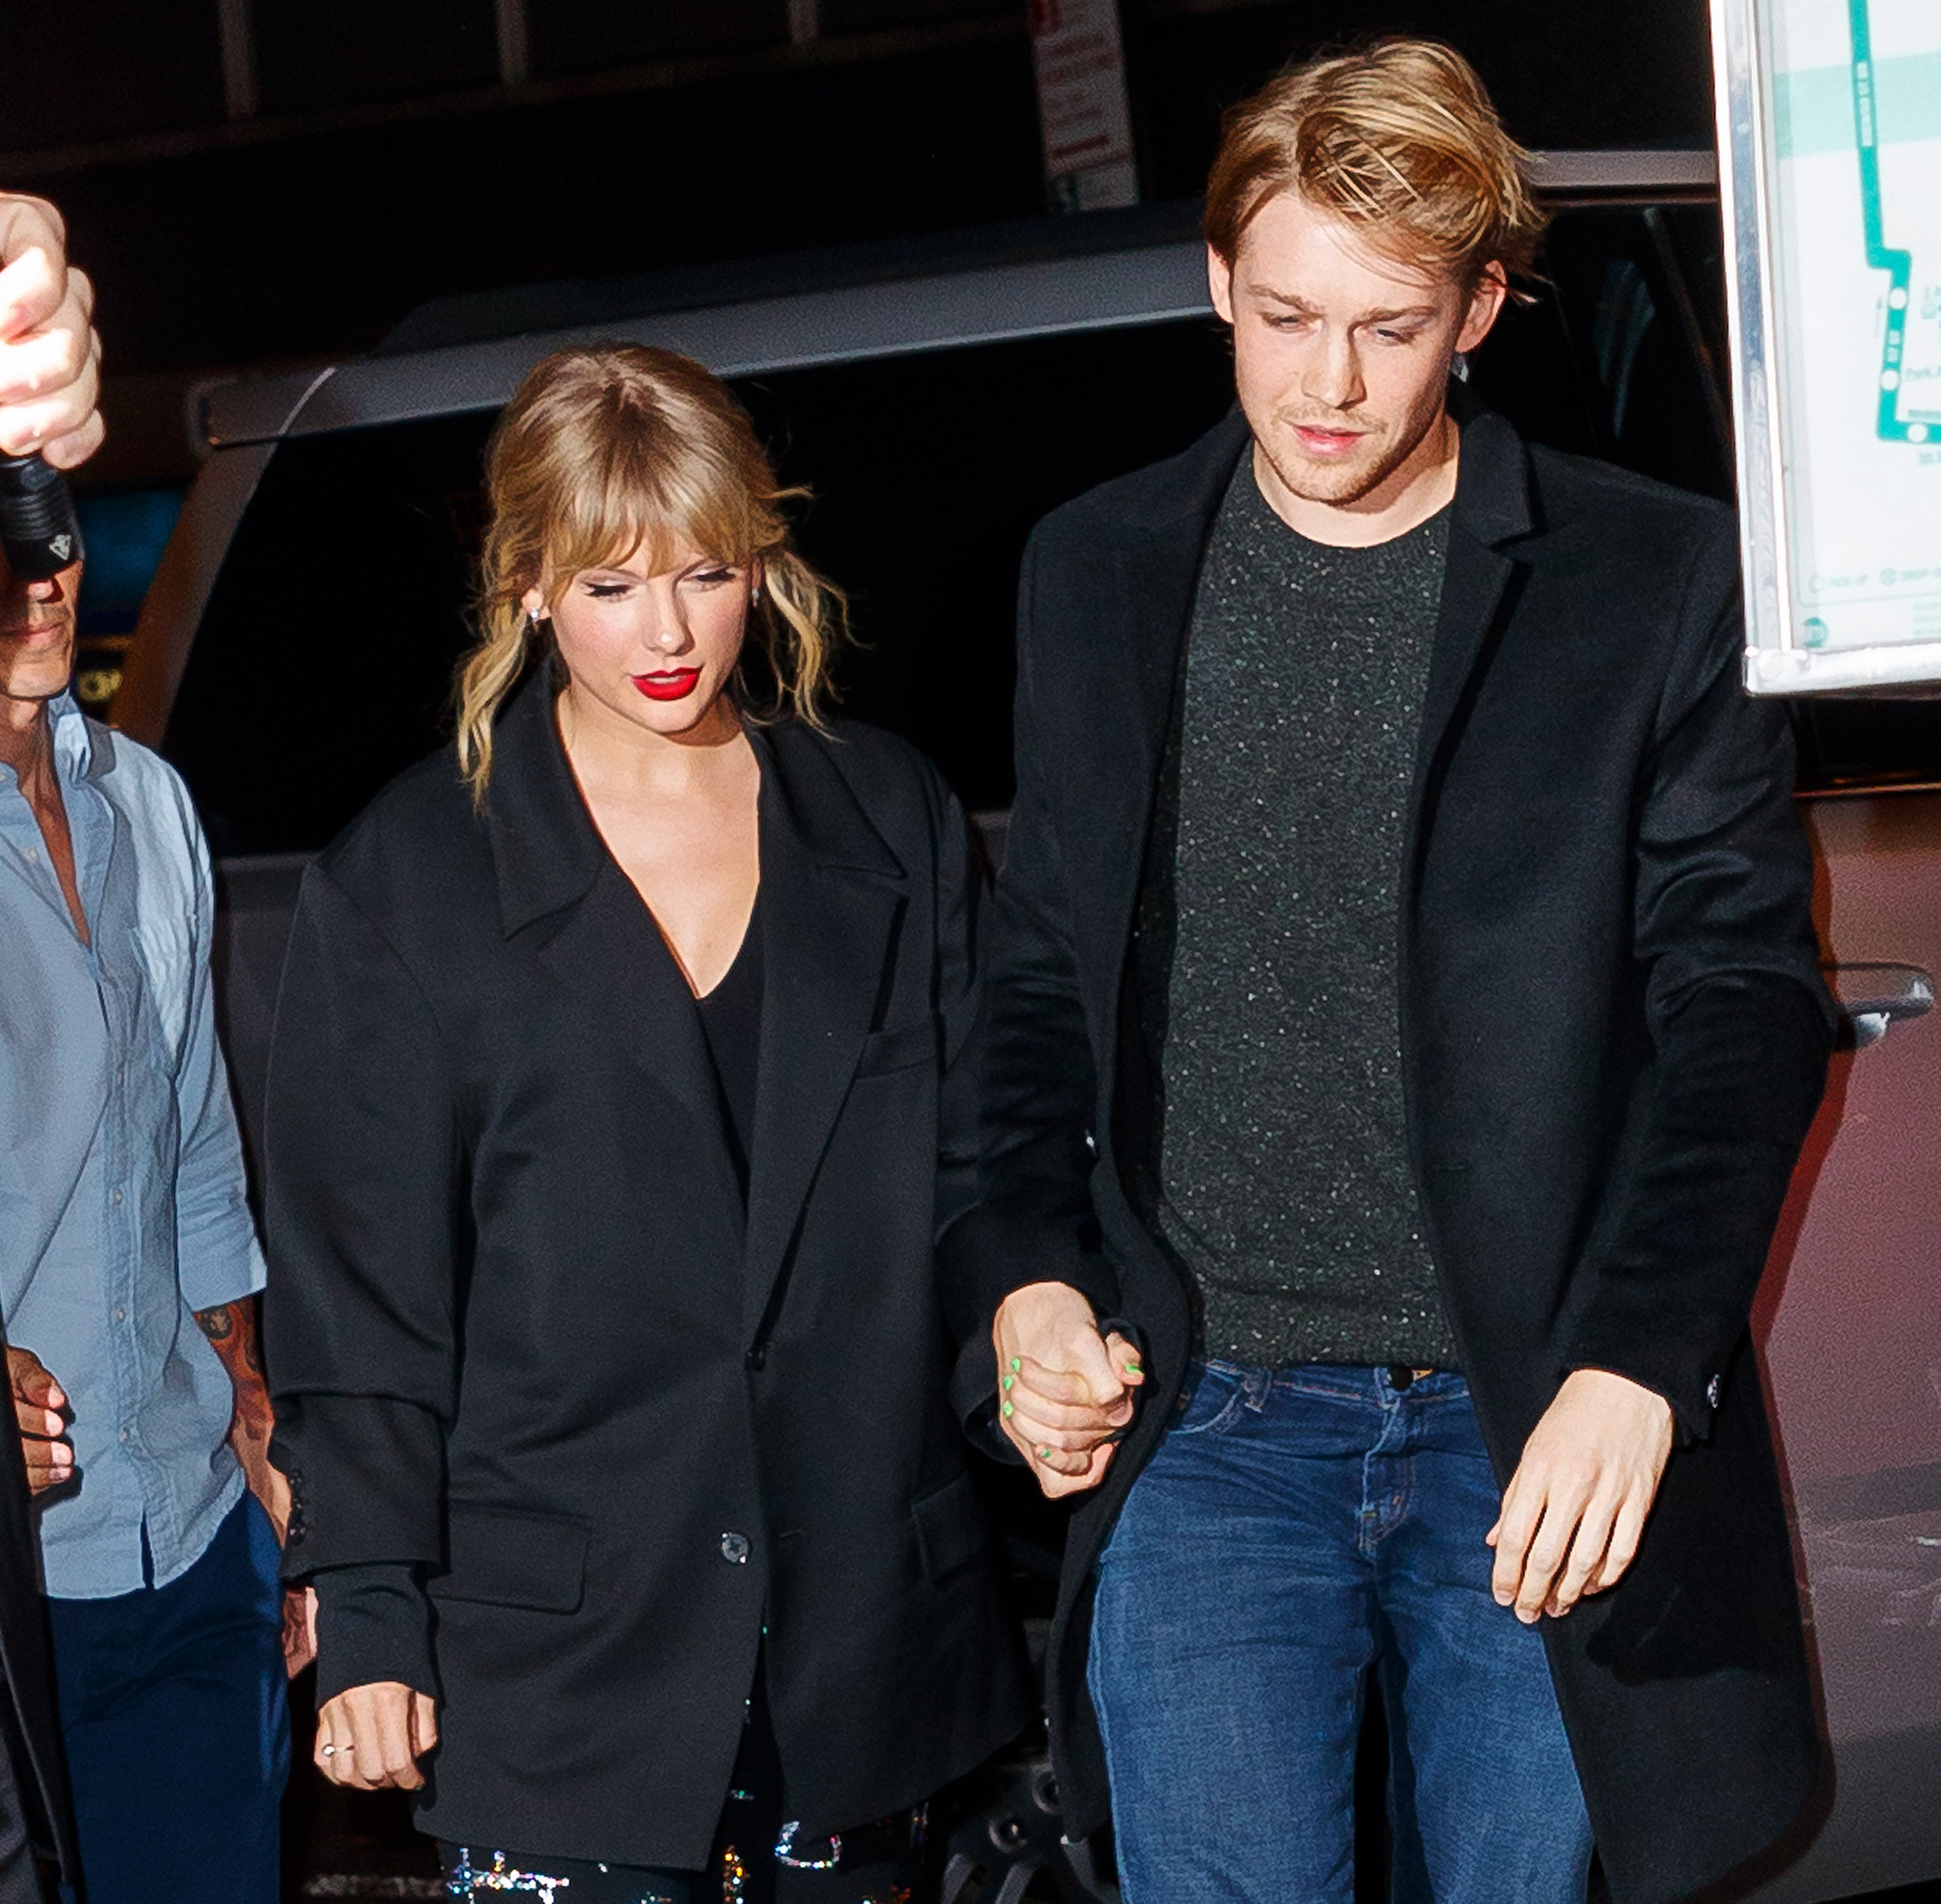 Taylor Swift's dating history: Full list of famous boyfriends